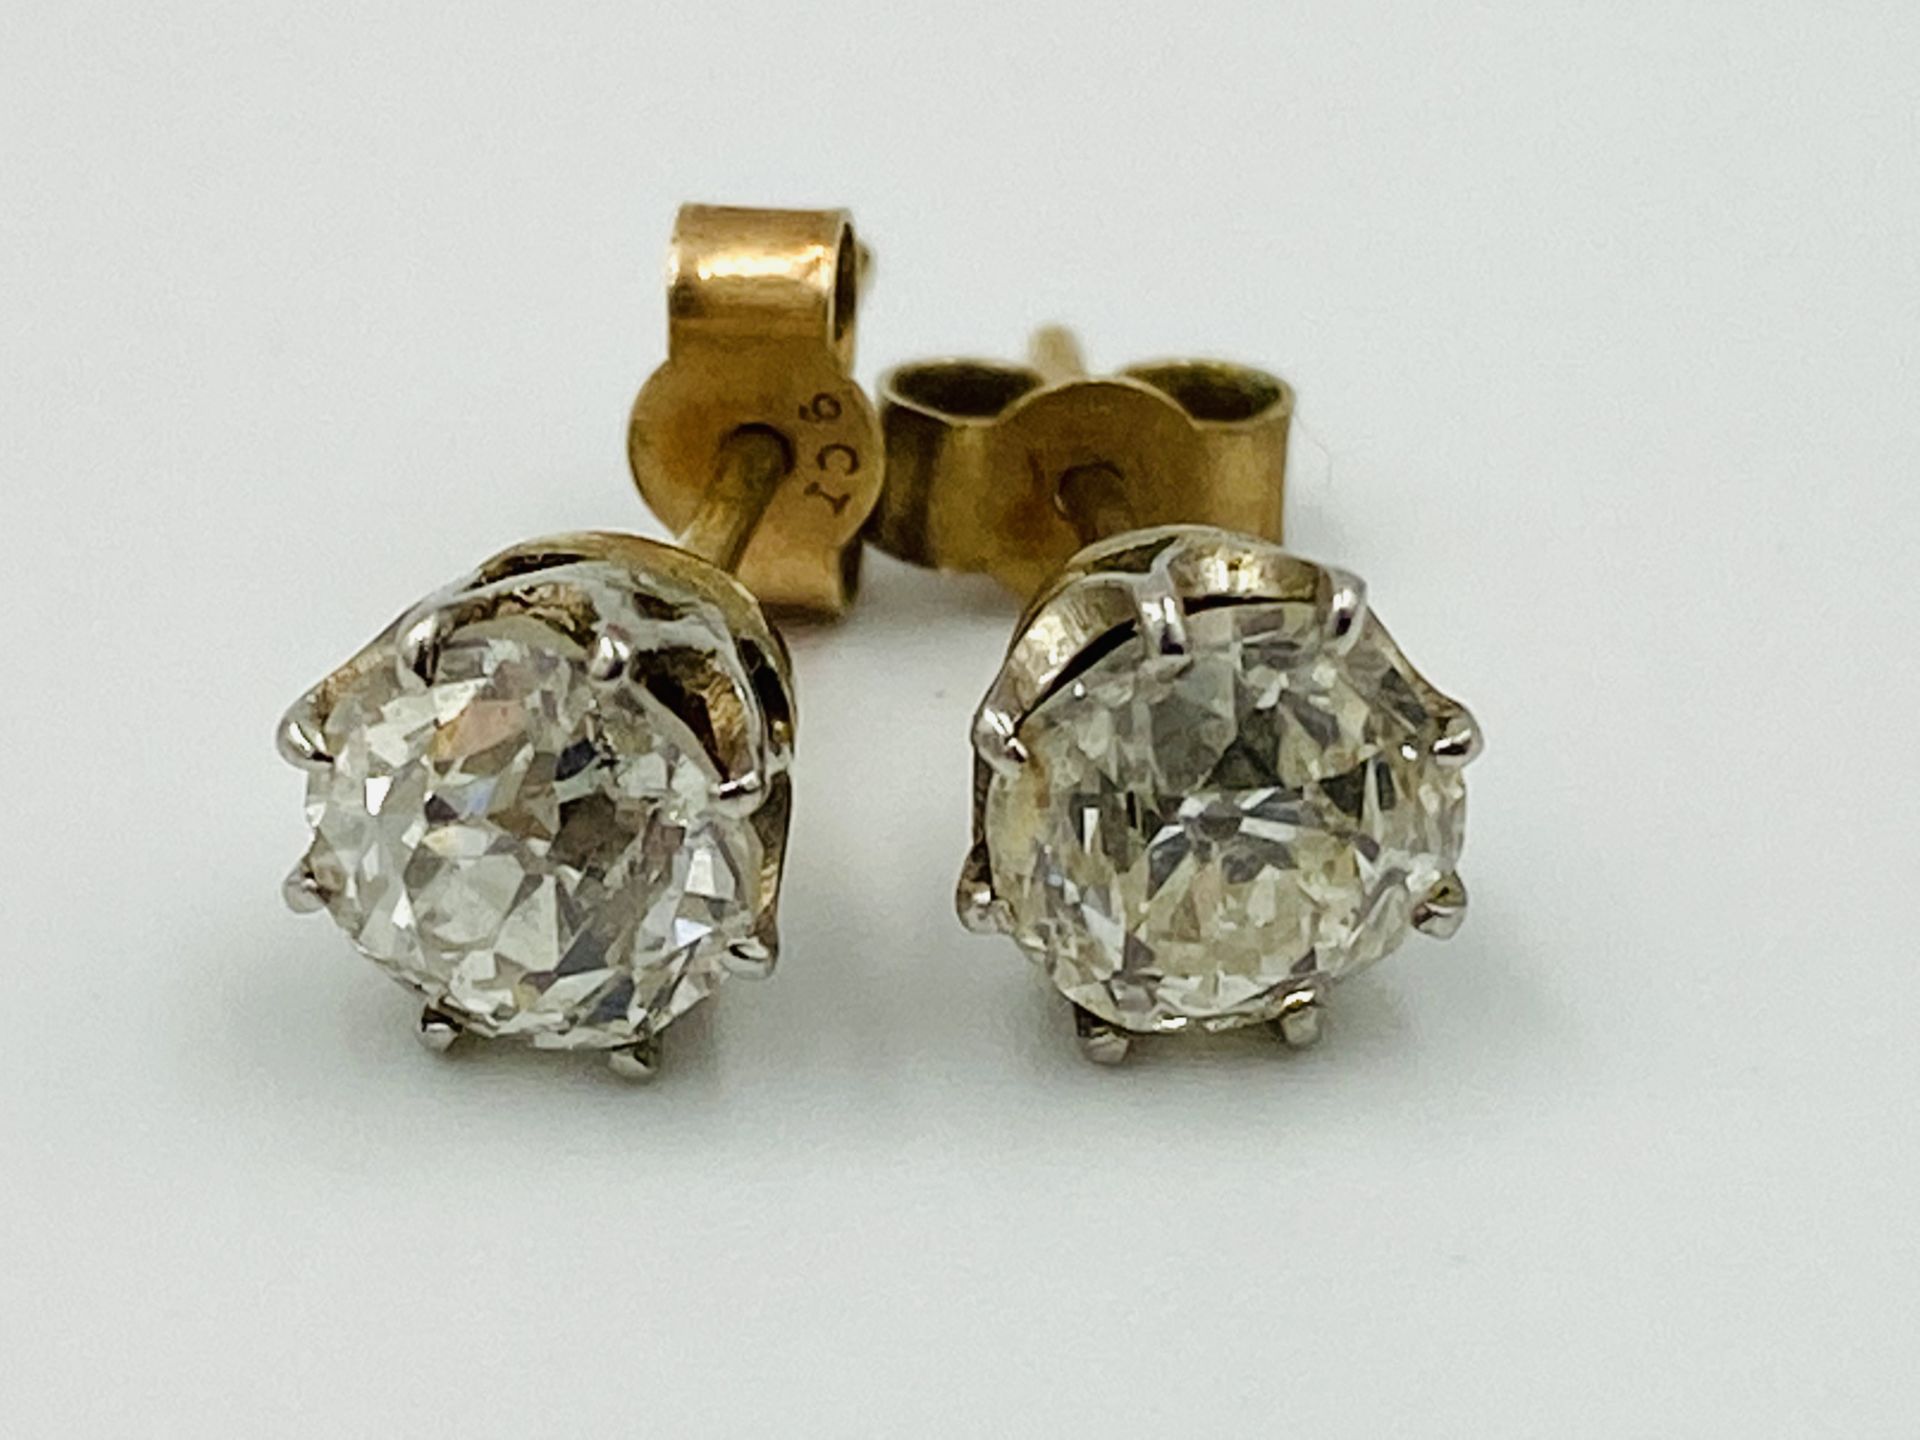 Pair of 9ct gold and diamond earrings